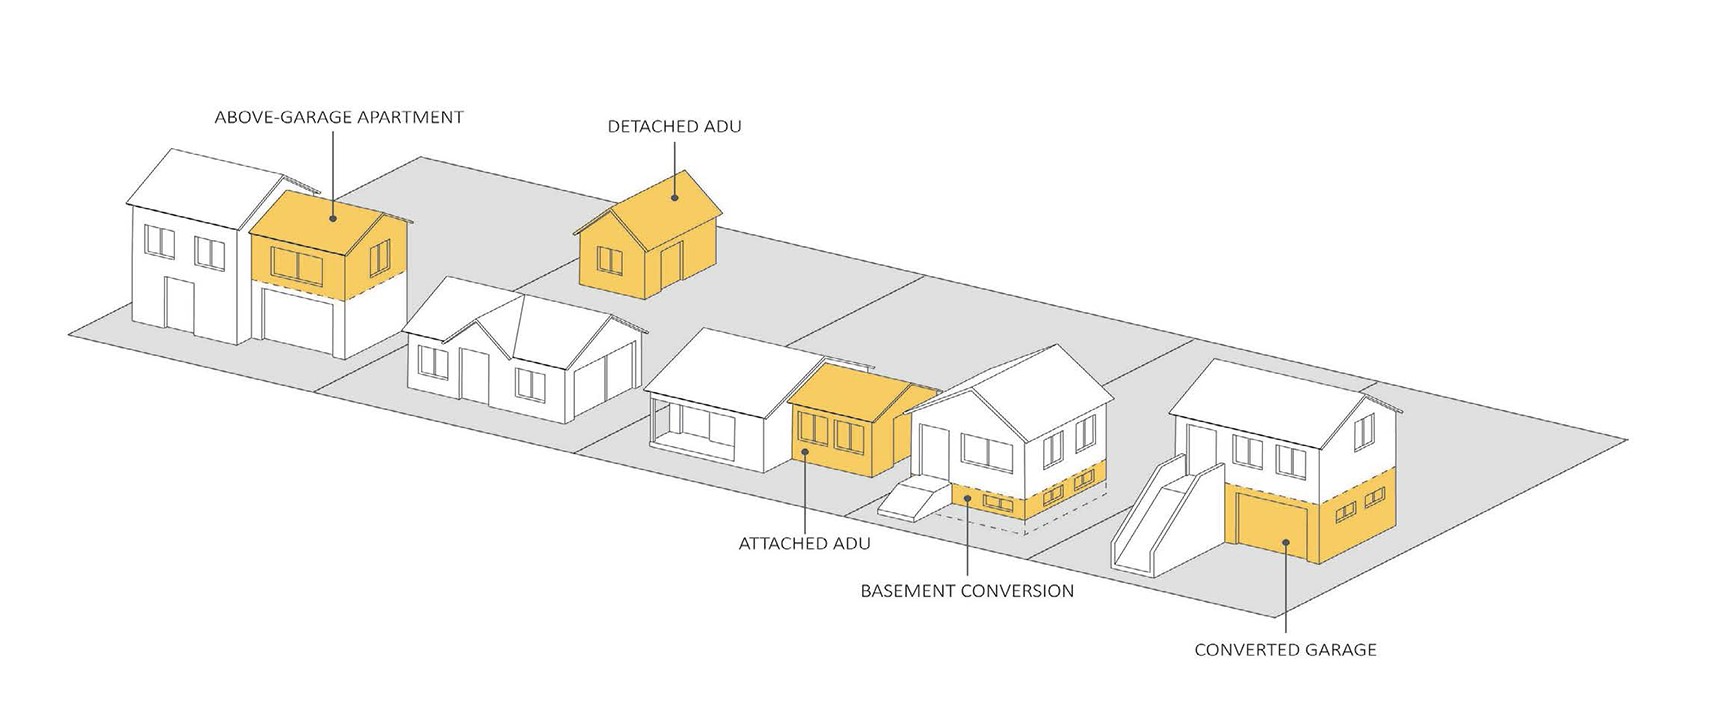 Diagram of houses showing detached, attached, and converted ADUs